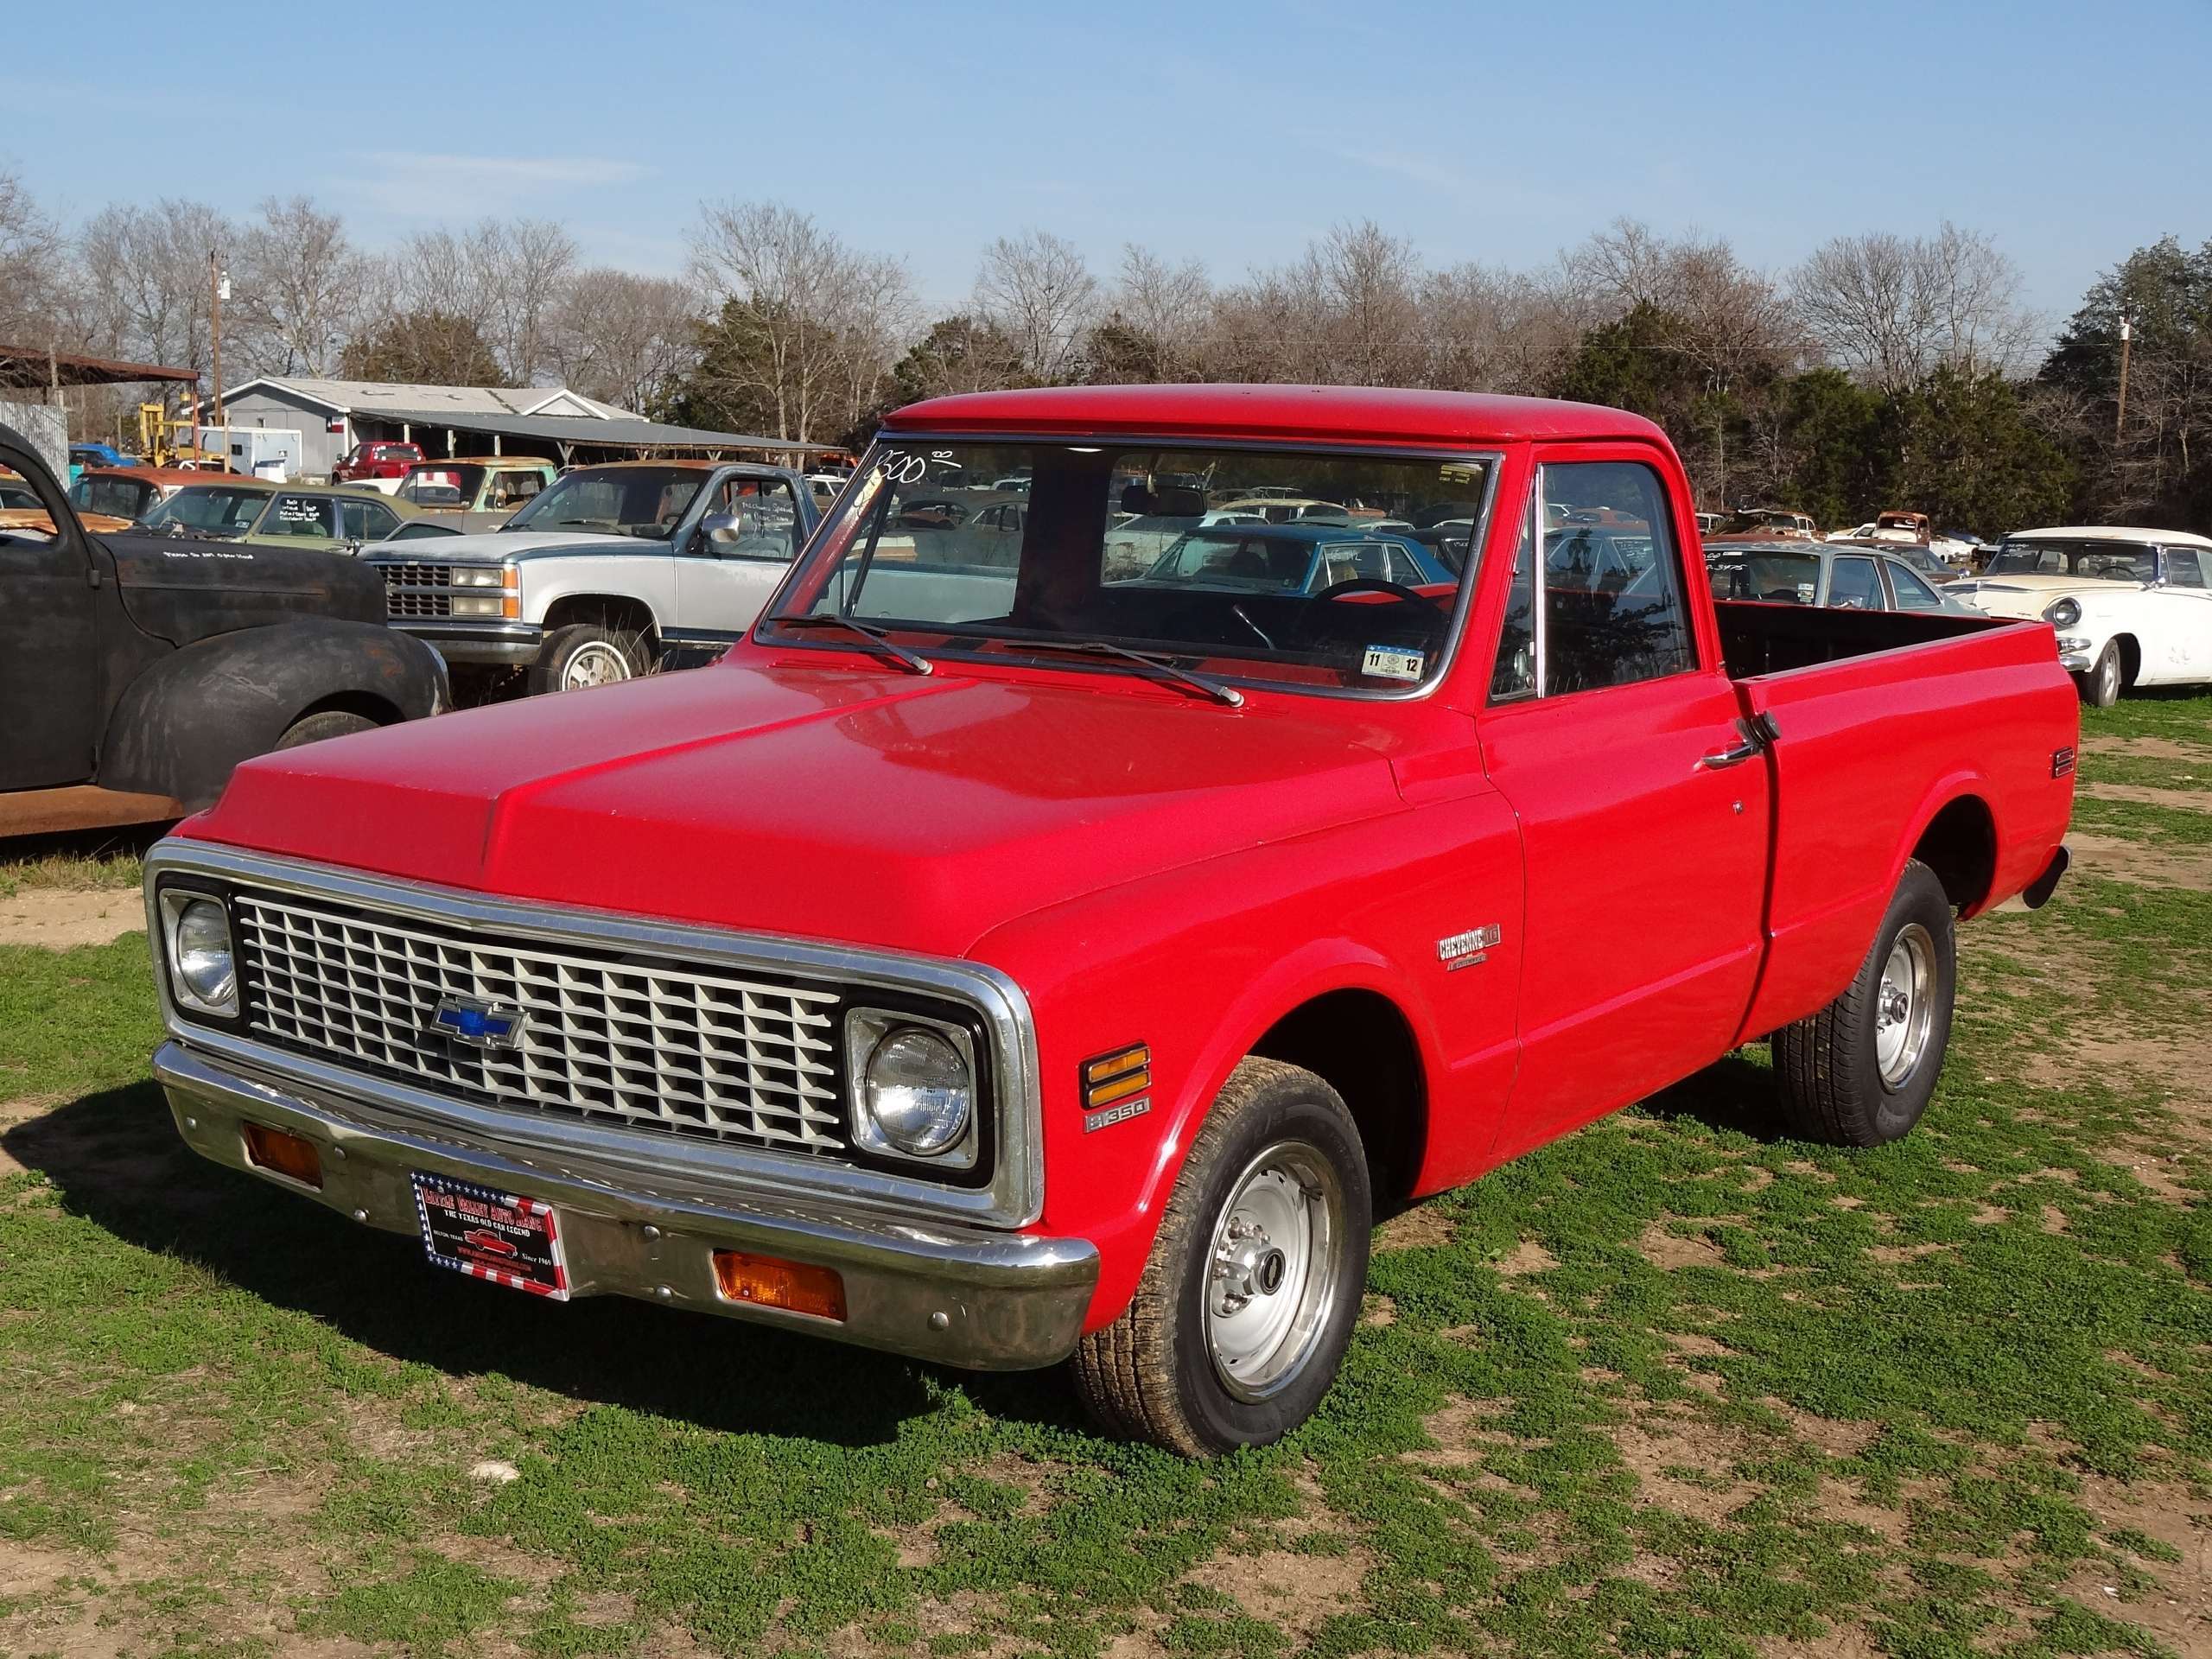 Of Chevy Truck At The Little Valley Auto Ranch Belton Texas Wallpaper